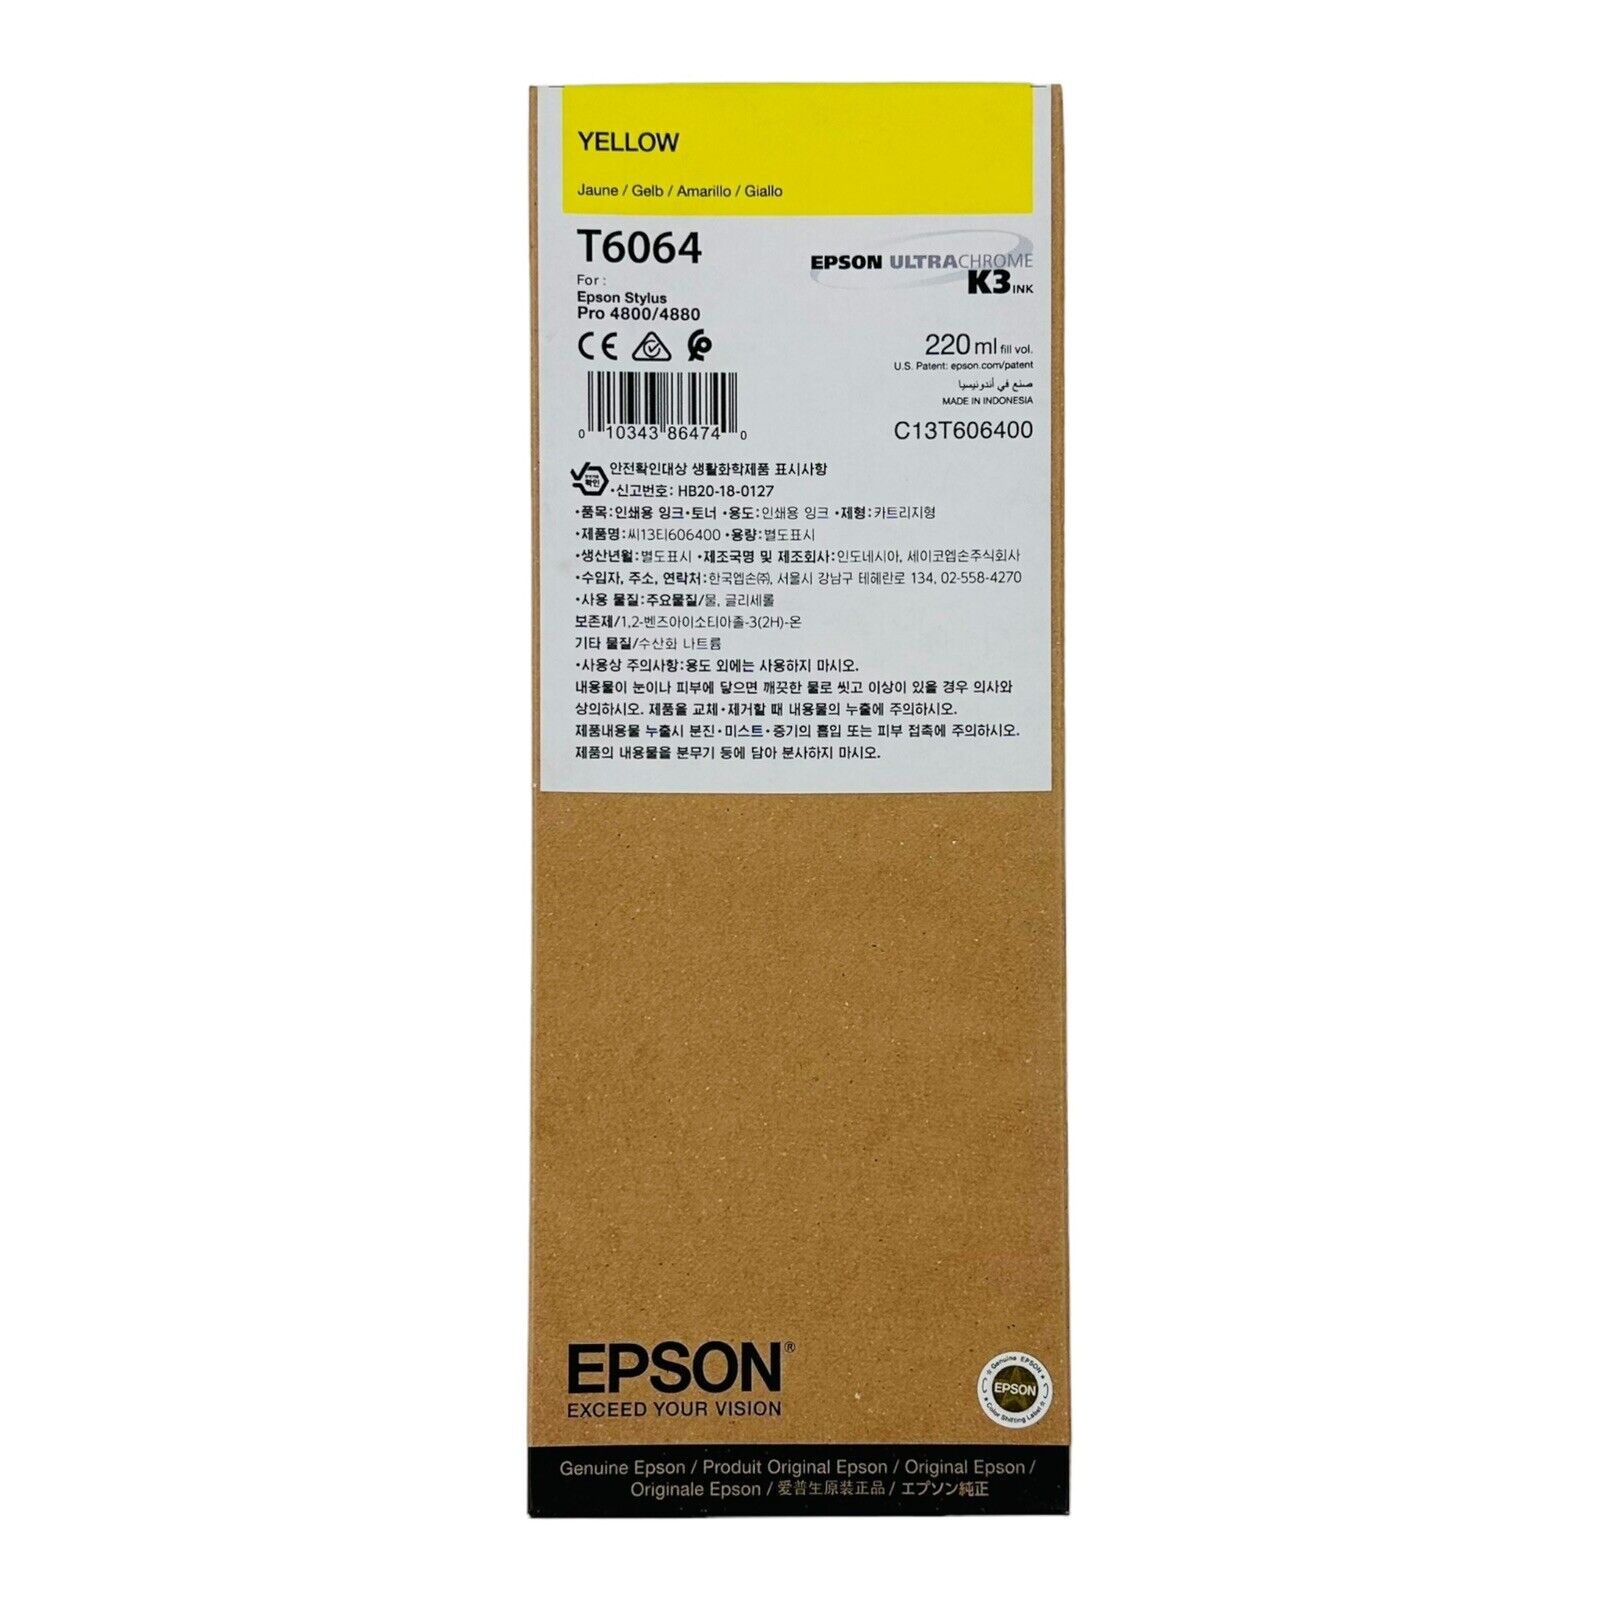 Genuine Epson T6064 Yellow Ink 220ml for Stylus Pro 4800/4880 Exp.03/08/2024